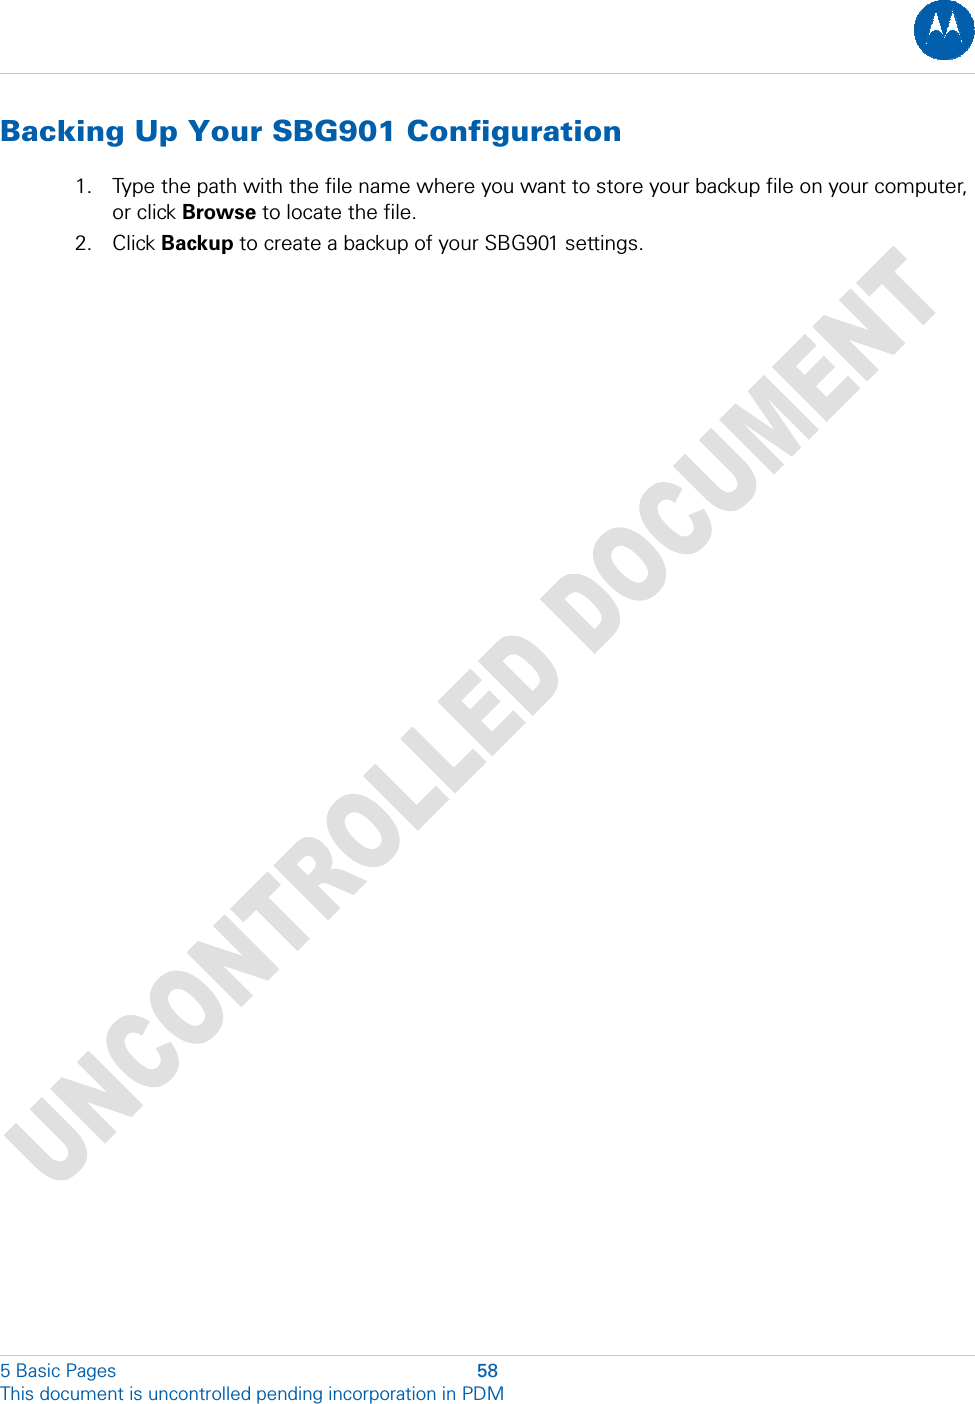  Backing Up Your SBG901 Configuration 1. Type the path with the file name where you want to store your backup file on your computer, or click Browse to locate the file. 2. Click Backup to create a backup of your SBG901 settings.  5 Basic Pages  58 This document is uncontrolled pending incorporation in PDM  